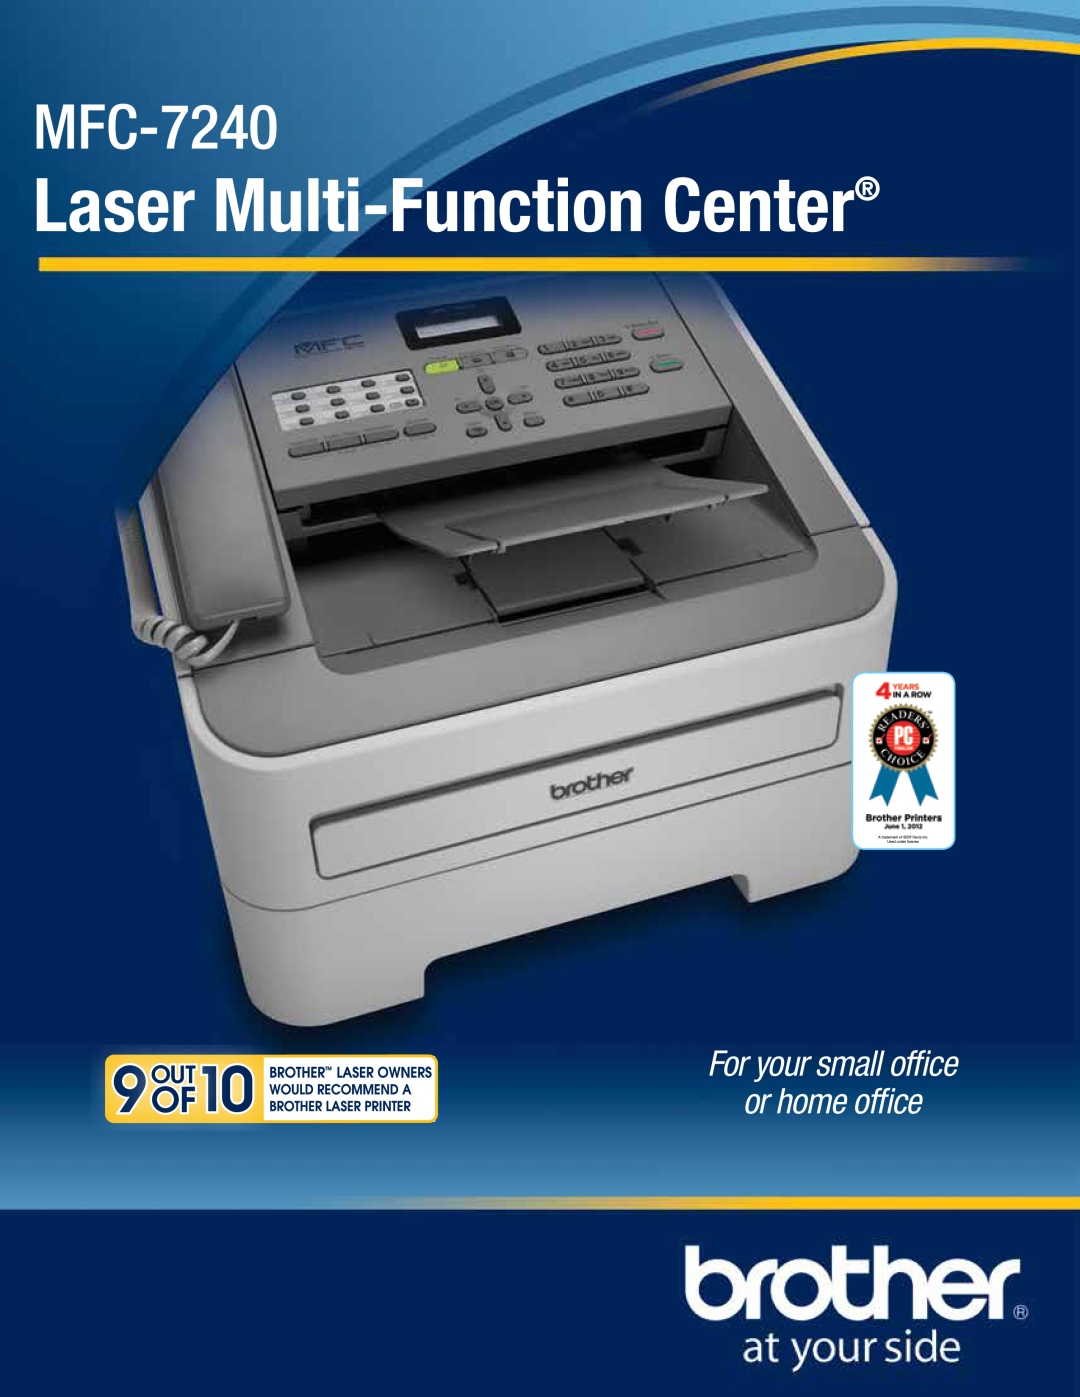 Brother MFC-7240 manual Laser Multi-Function Center, For your small office or home office, 04/11/13 